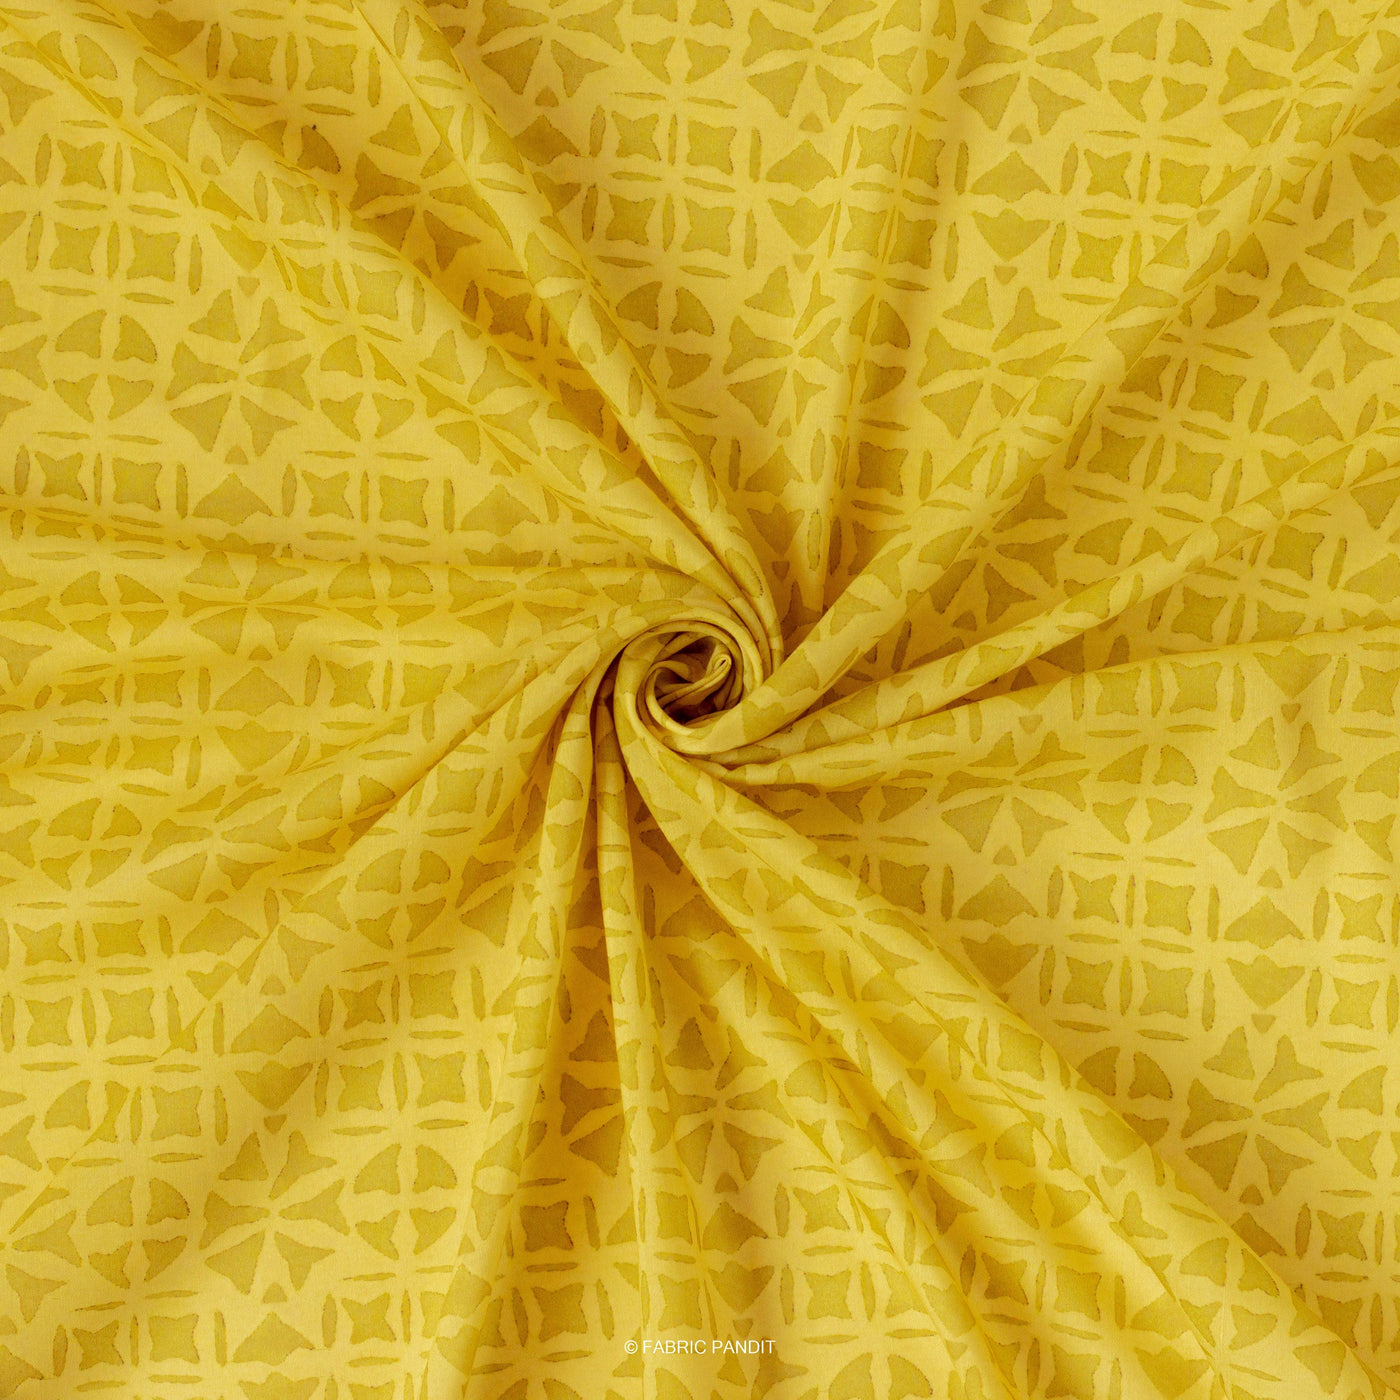 Fabric Pandit Cut Piece (Cut Piece) Mustard Yellow Squares And Circles Geometric Applique Pattern Digital Printed Muslin Fabric (Width 44 Inches)